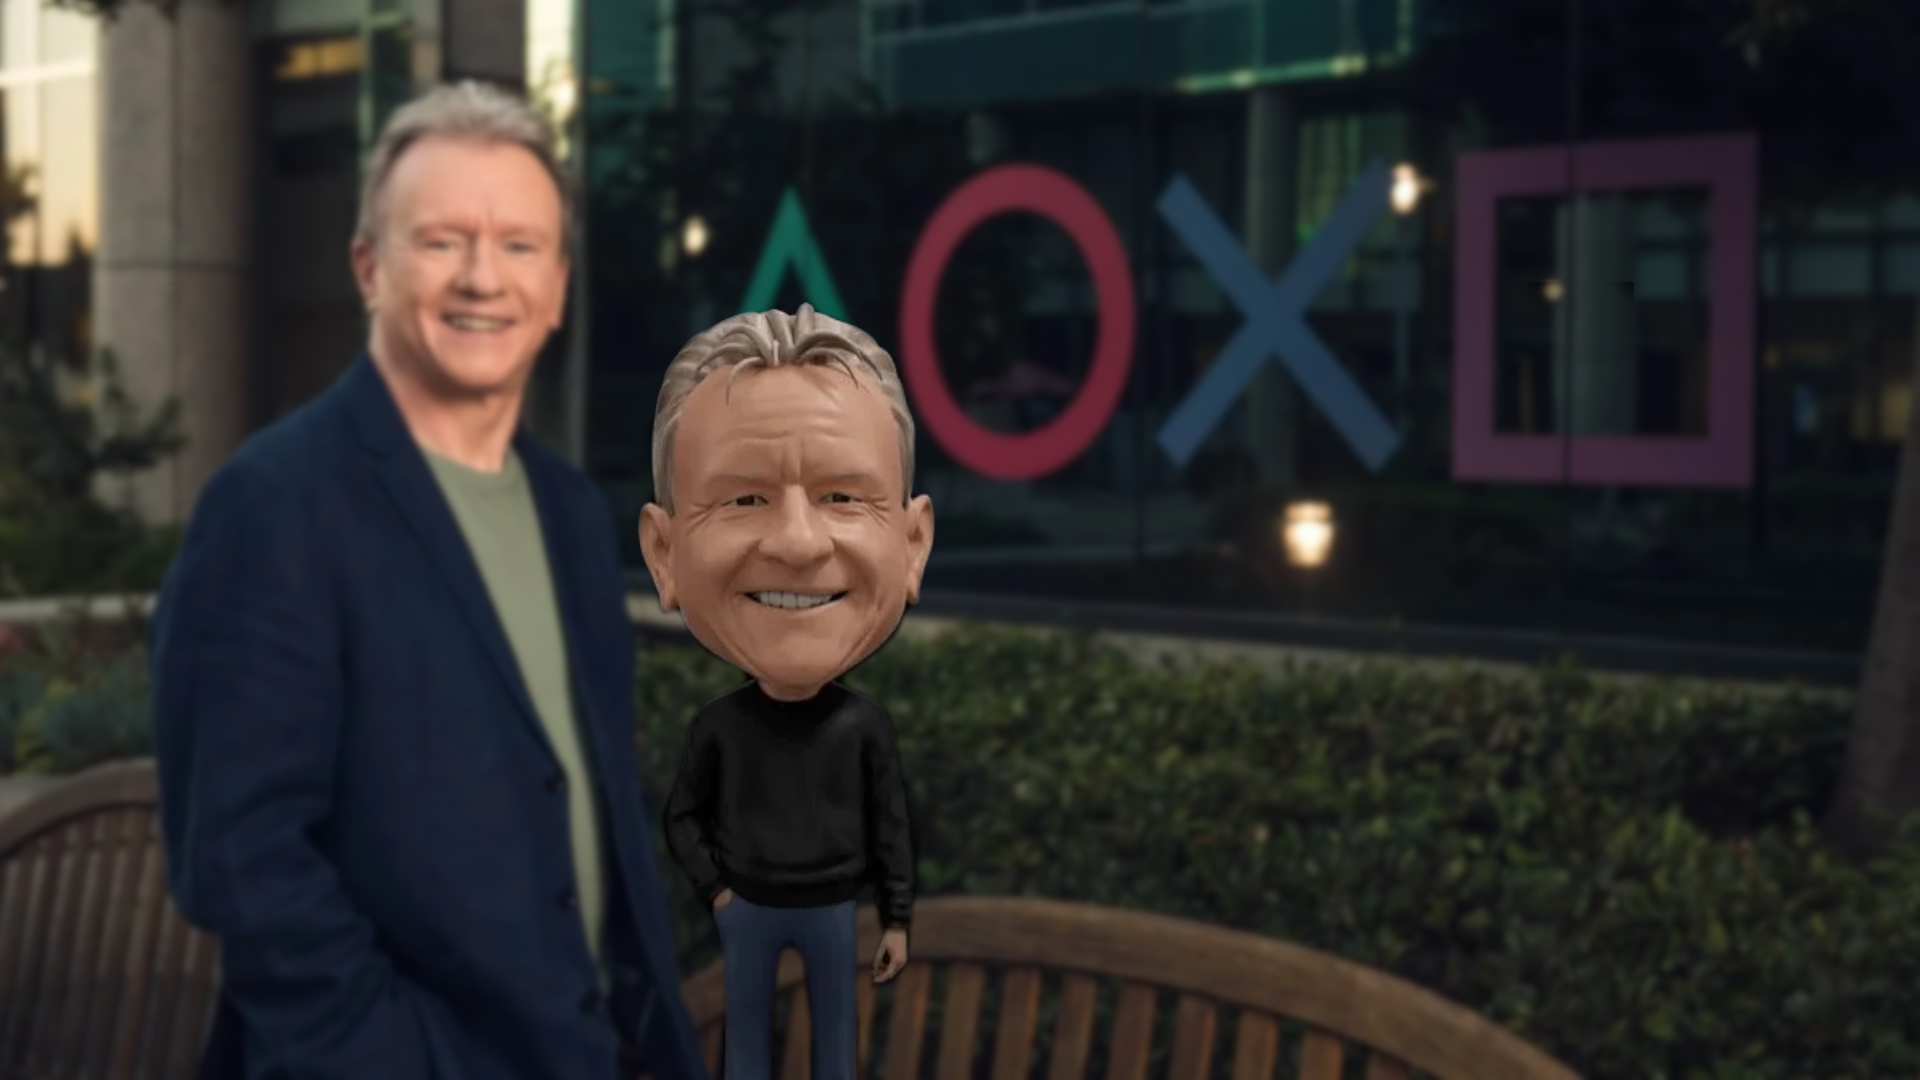 PS5 Avid gamers Can Particular person Jim Ryan in Bobblehead Type